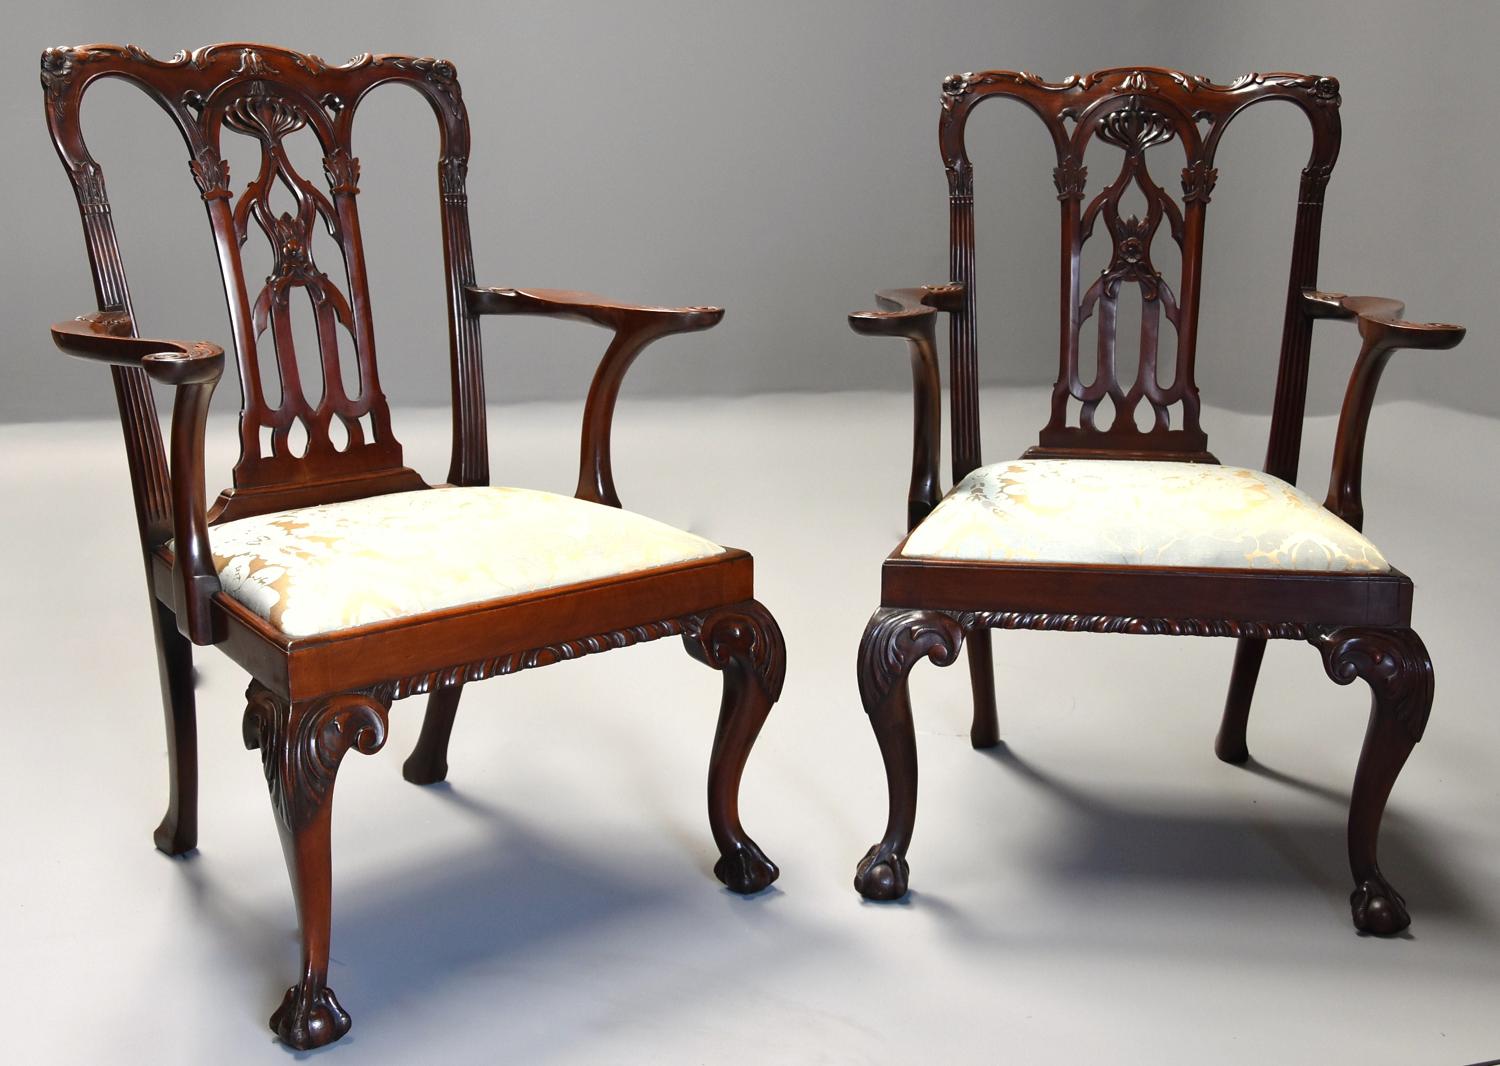 Pair of fine quality 19thc mahogany Chippendale style armchairs